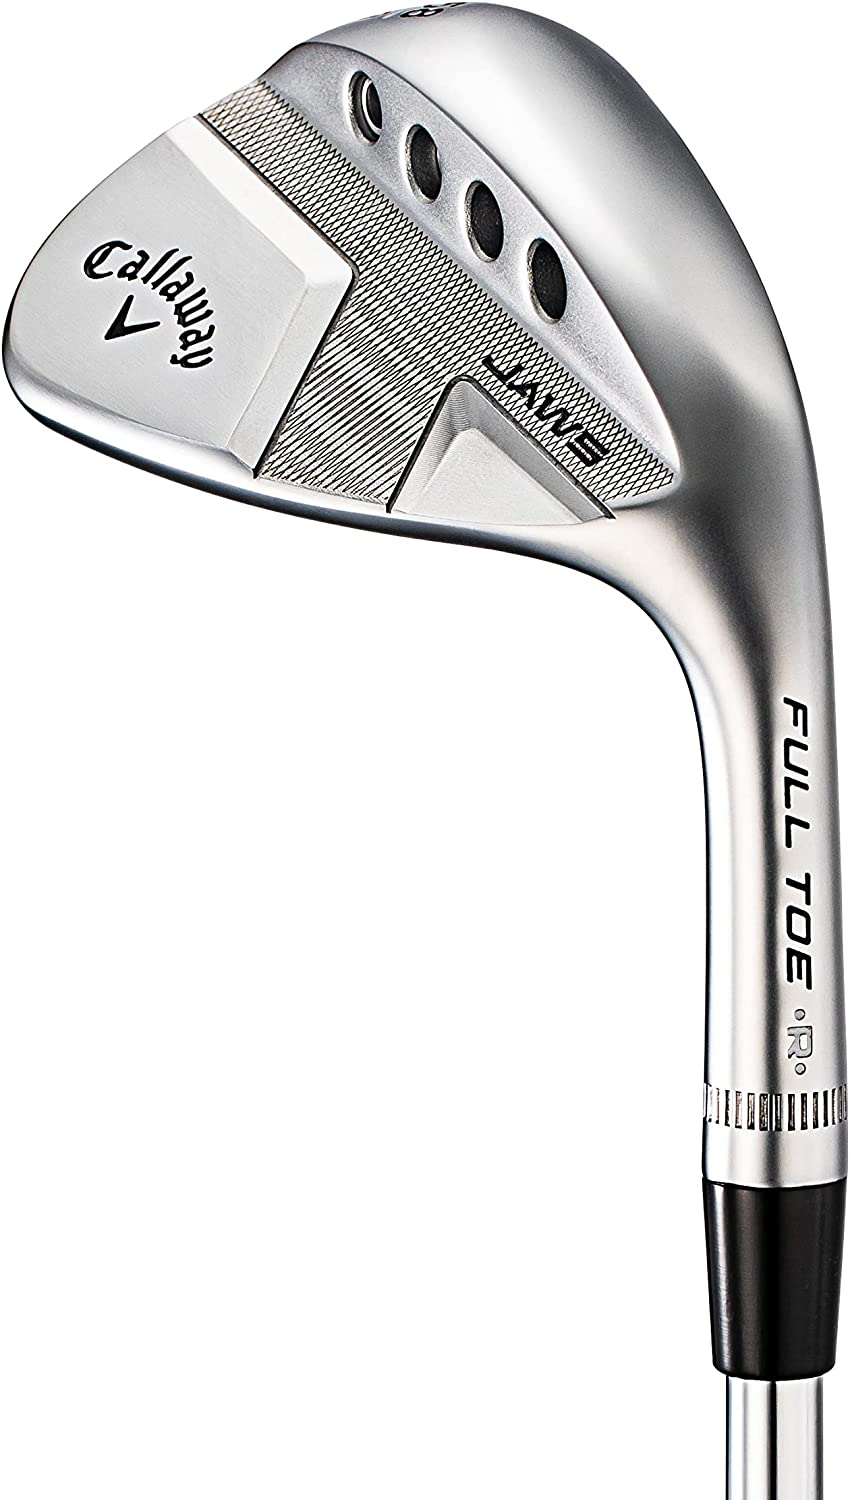 pros and cons of callaway jaws raw/full toe